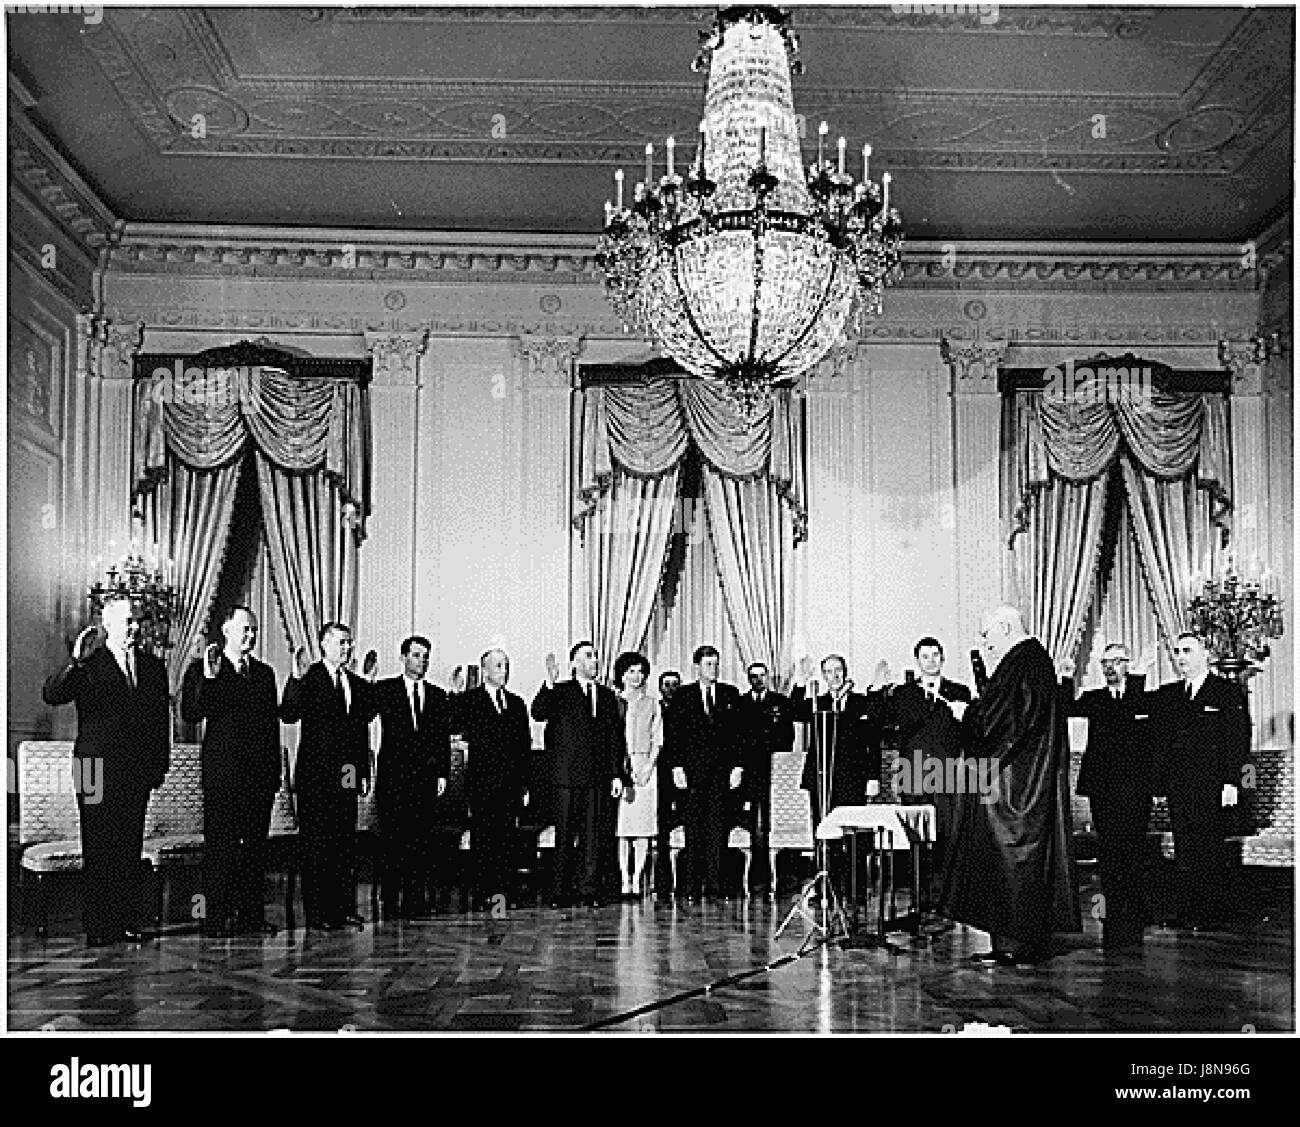 Swearing-In Ceremony of United States President John F. Kennedy's Cabinet in the East Room of the White House on January 21, 1961.   U.S. Chief Justice Earl Warren administers Oath to (L-R) Dean Rusk, Secretary of State;  Douglas Dillon, Secretary of the Treasury;  Robert S. McNamara, Secretary of Defense;  Robert F. Kennedy, Attorney General;  J. Edward Day, Postmaster General;  Stewart Udall, Secretary of Interior;   First Lady Jacqueline Kennedy;  U.S. President John F. Kennedy;  Adlai E. Stevenson, U.S. Representative to the United Nations;  Orville Freeman, Secretary of Agriculture;  (hid Stock Photo